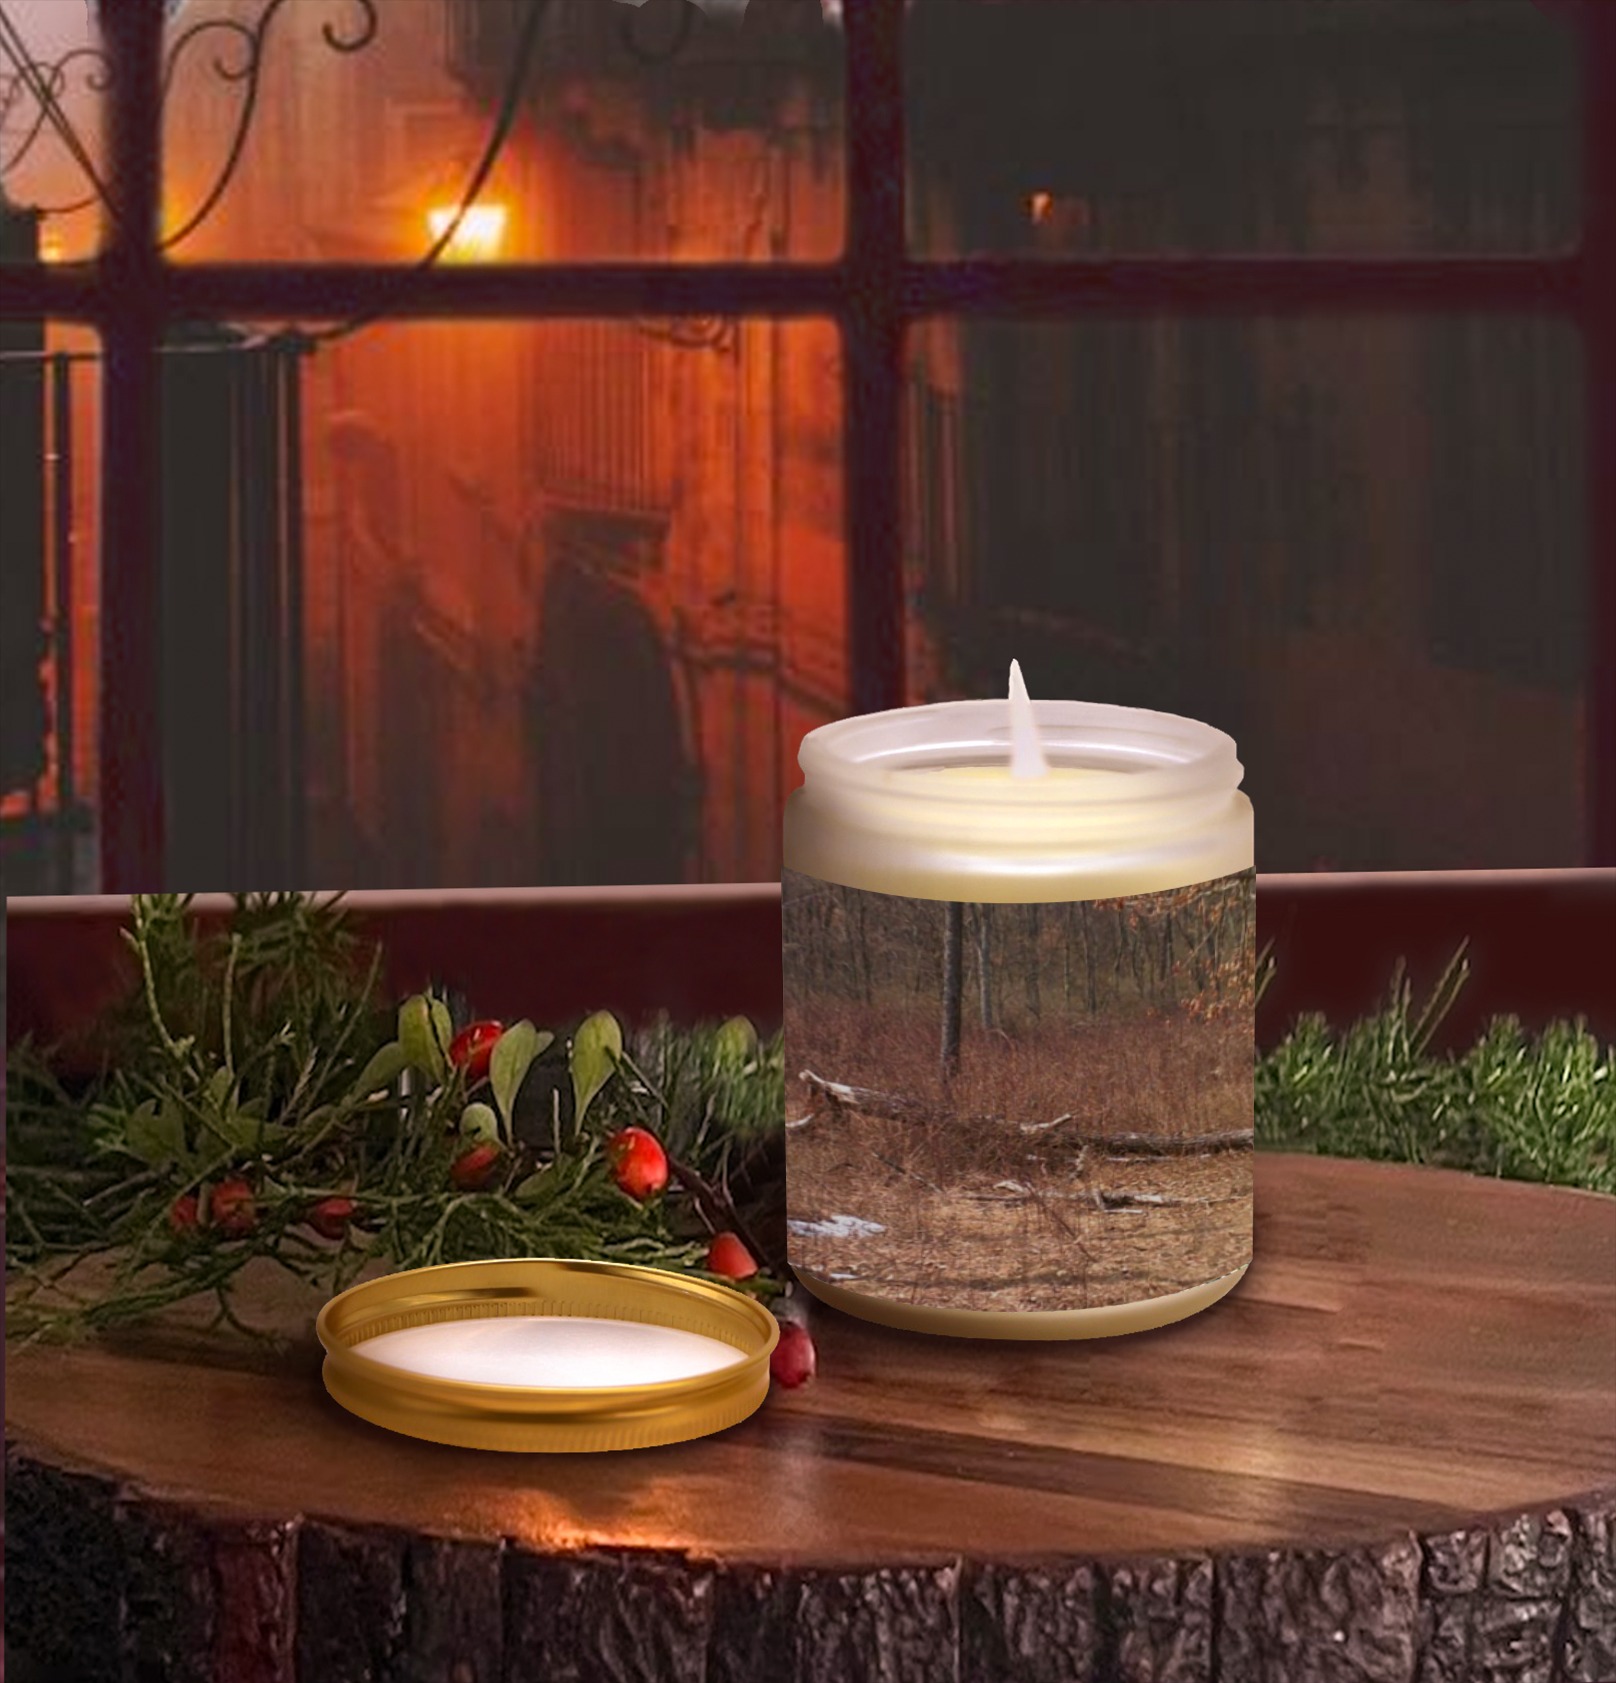 Falling tree in the woods Frosted Glass Candle Cup - Large Size (Lavender&Lemon)